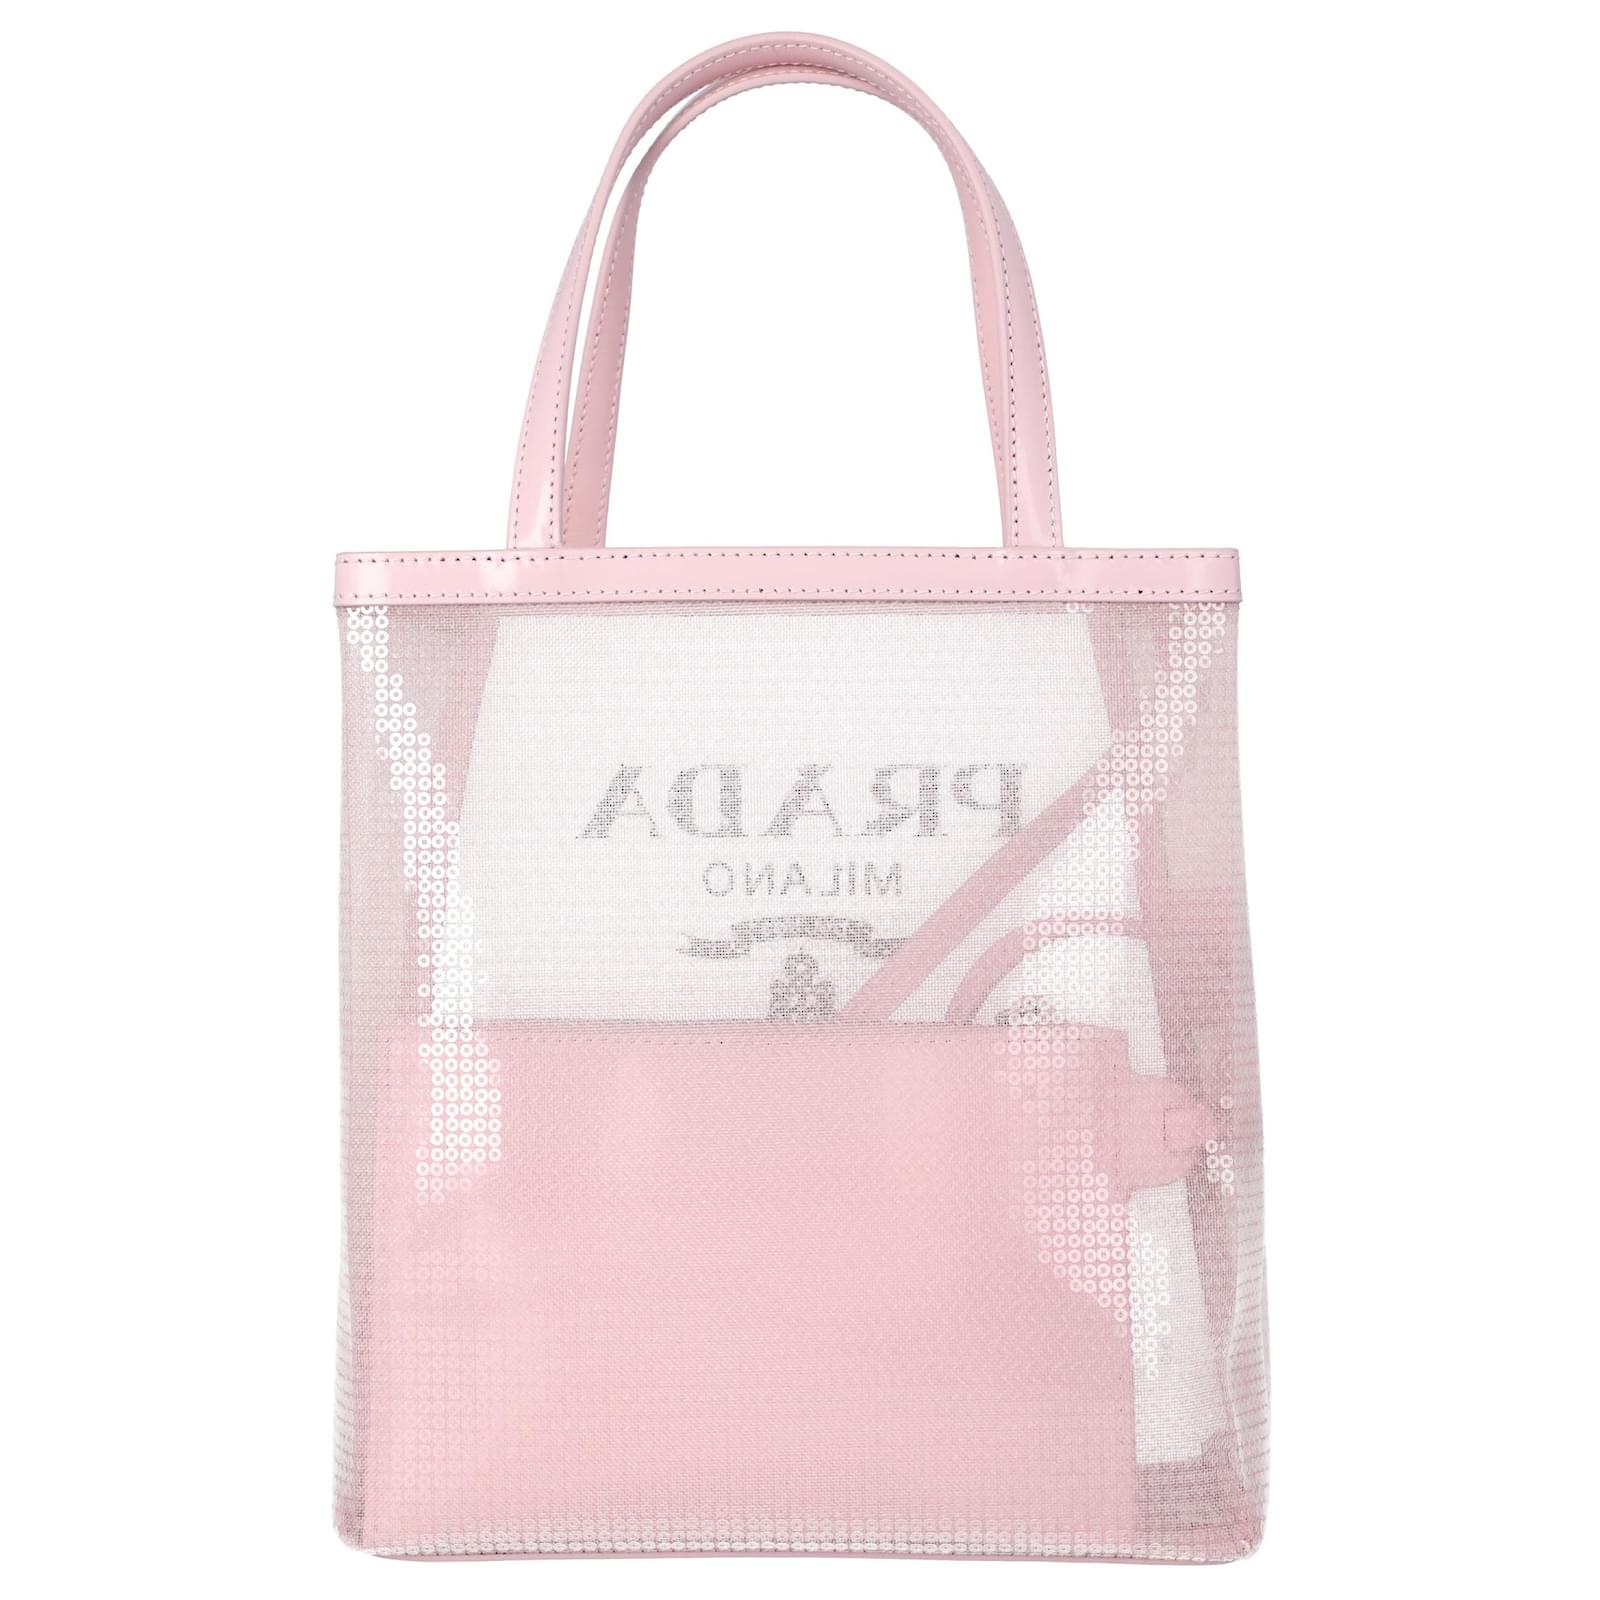 Prada Small Leather Net Bag in Pink